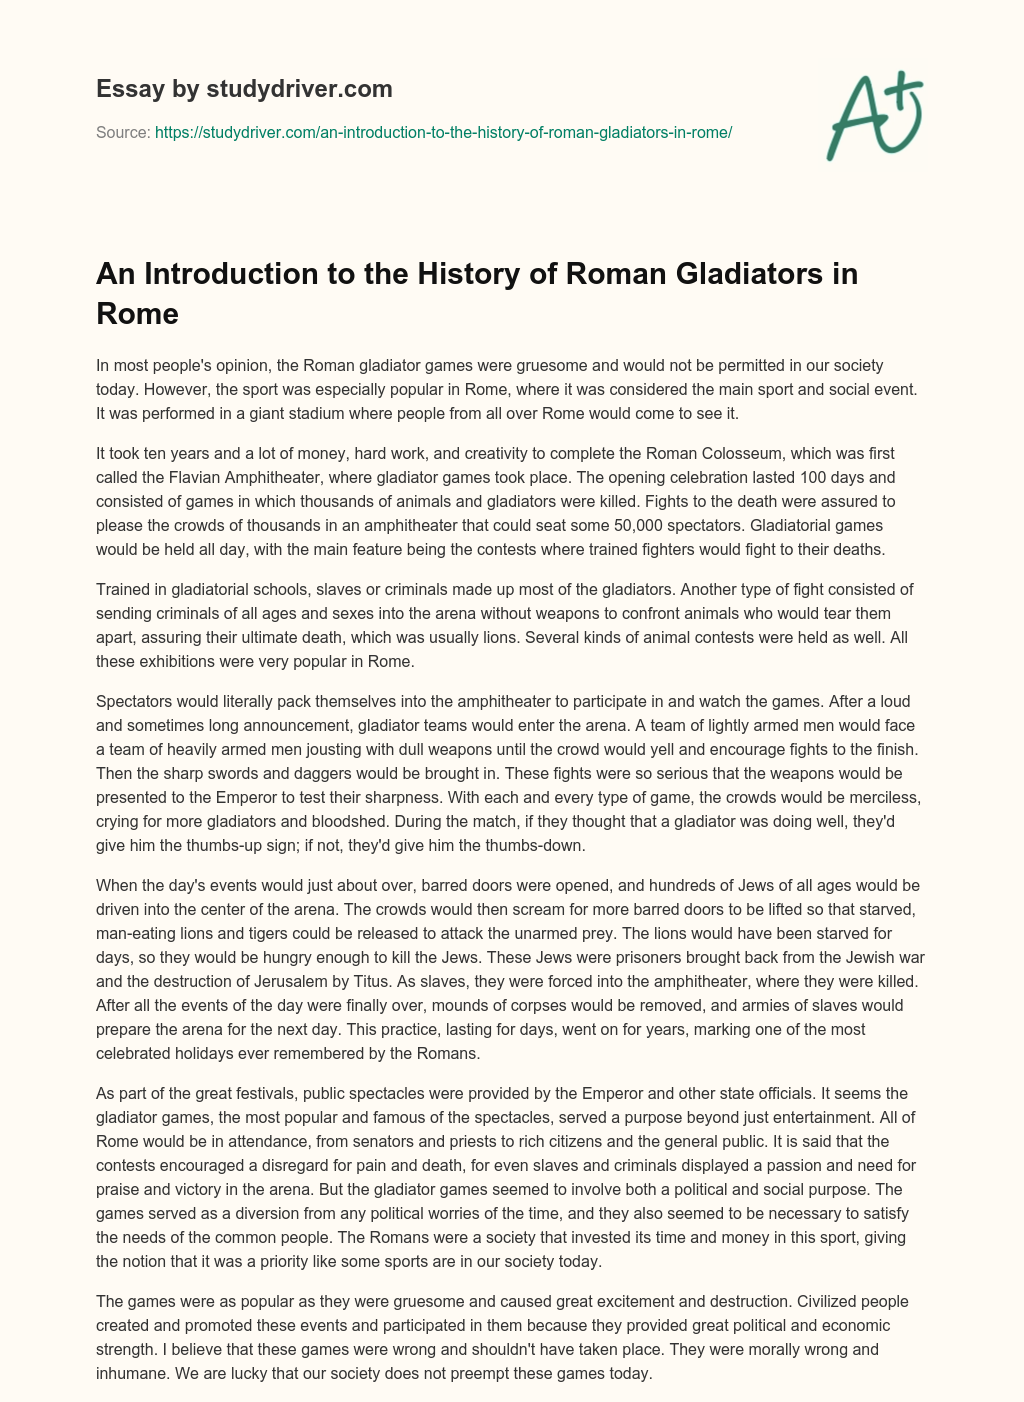 An Introduction to the History of Roman Gladiators in Rome essay